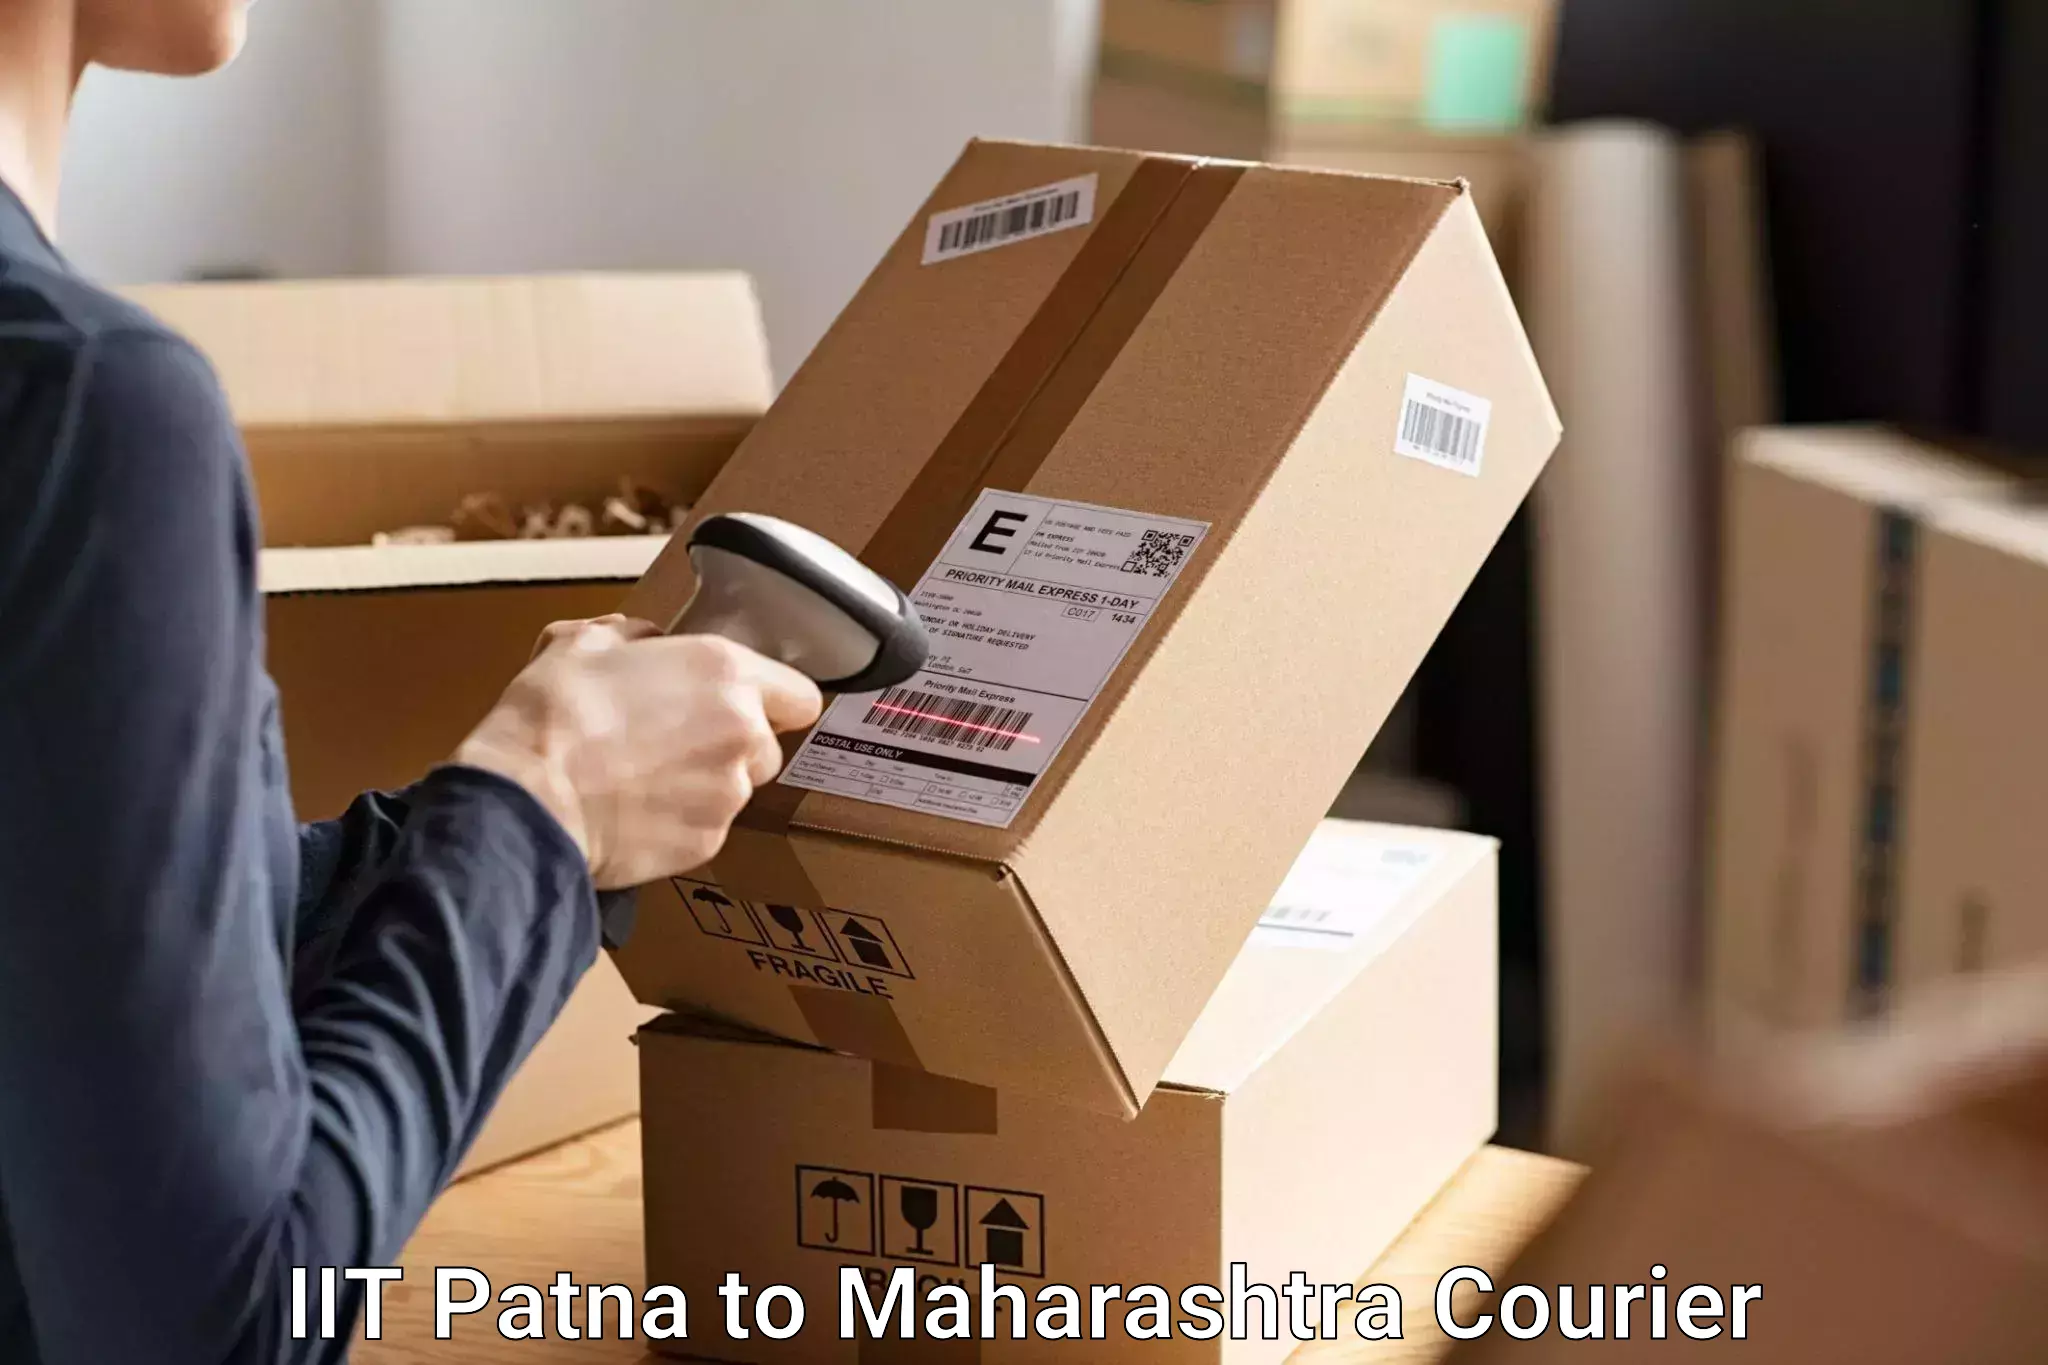 Personal baggage courier IIT Patna to Shirdi